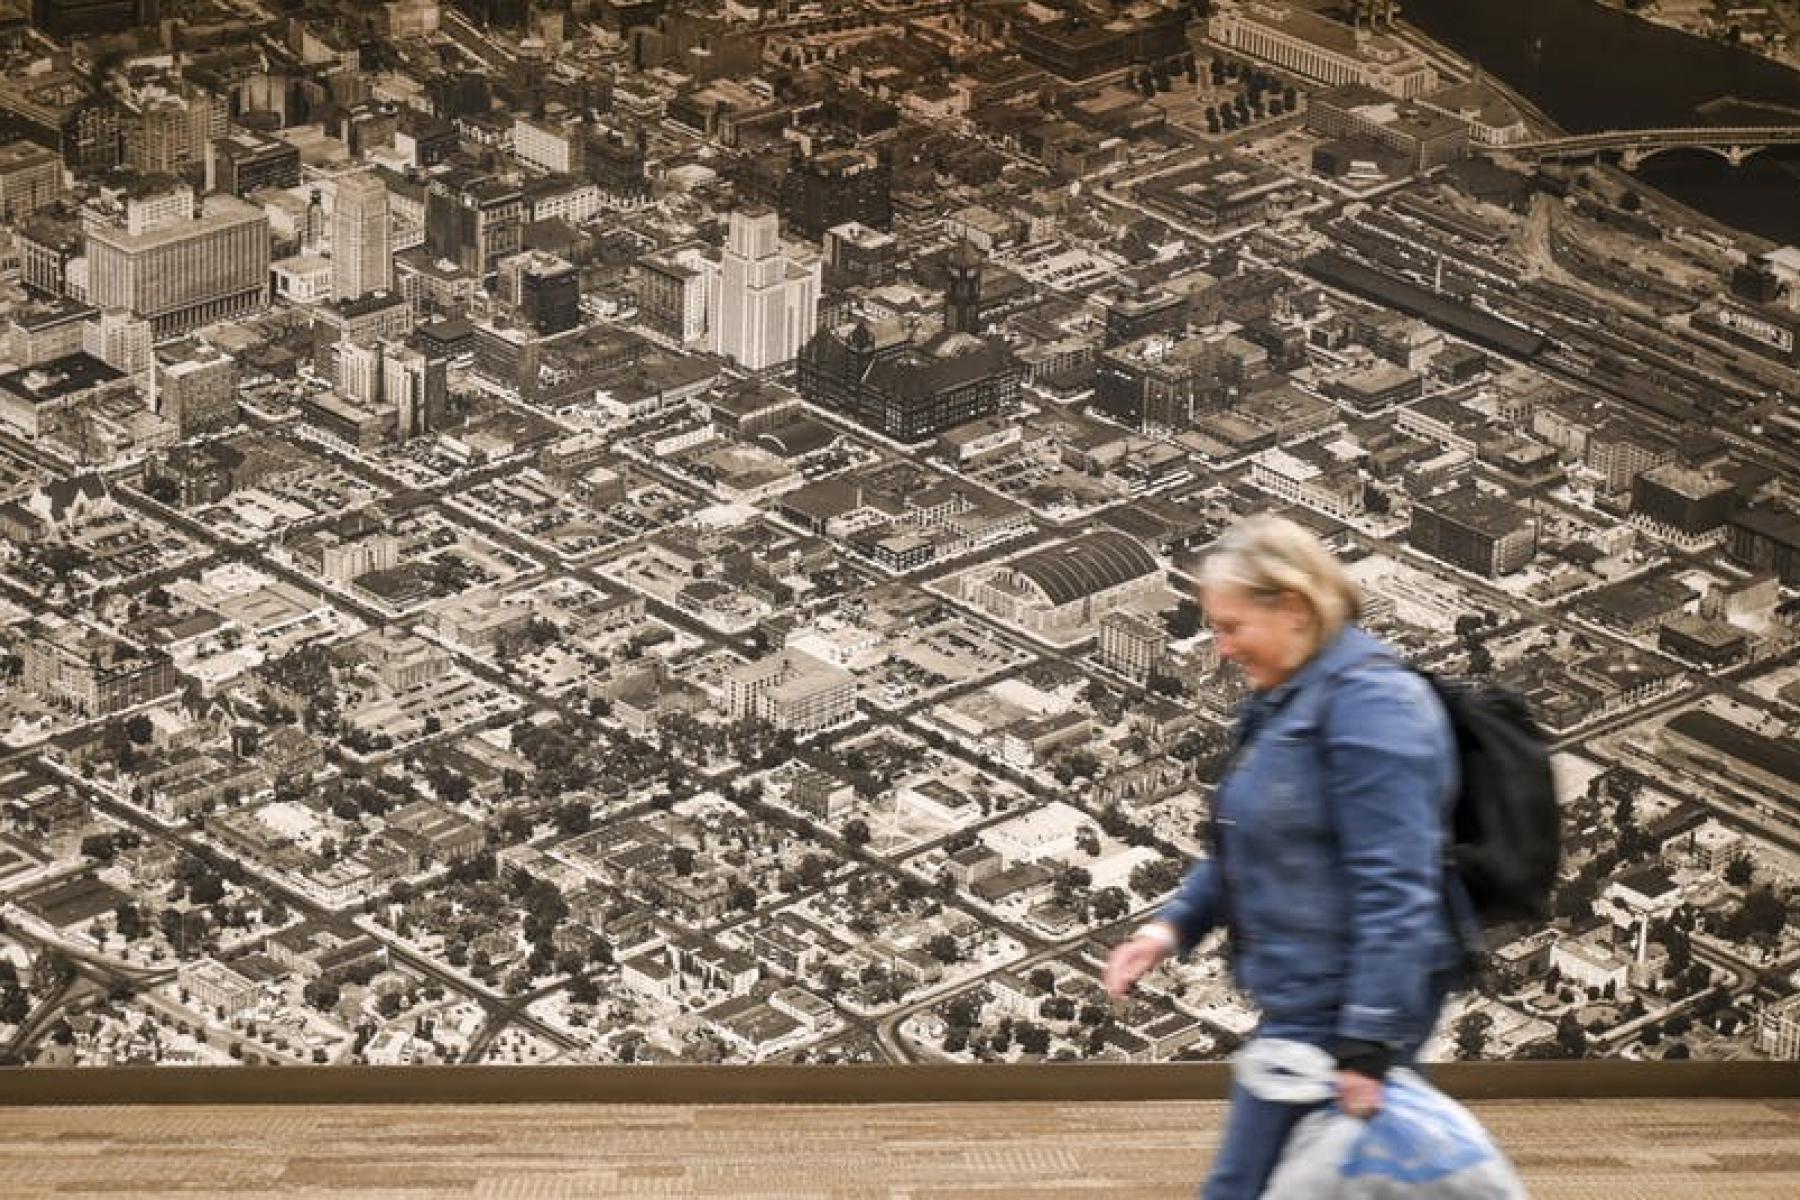 Large historical panoramas hang in the Wells Fargo Bank building's skyway in Downtown East